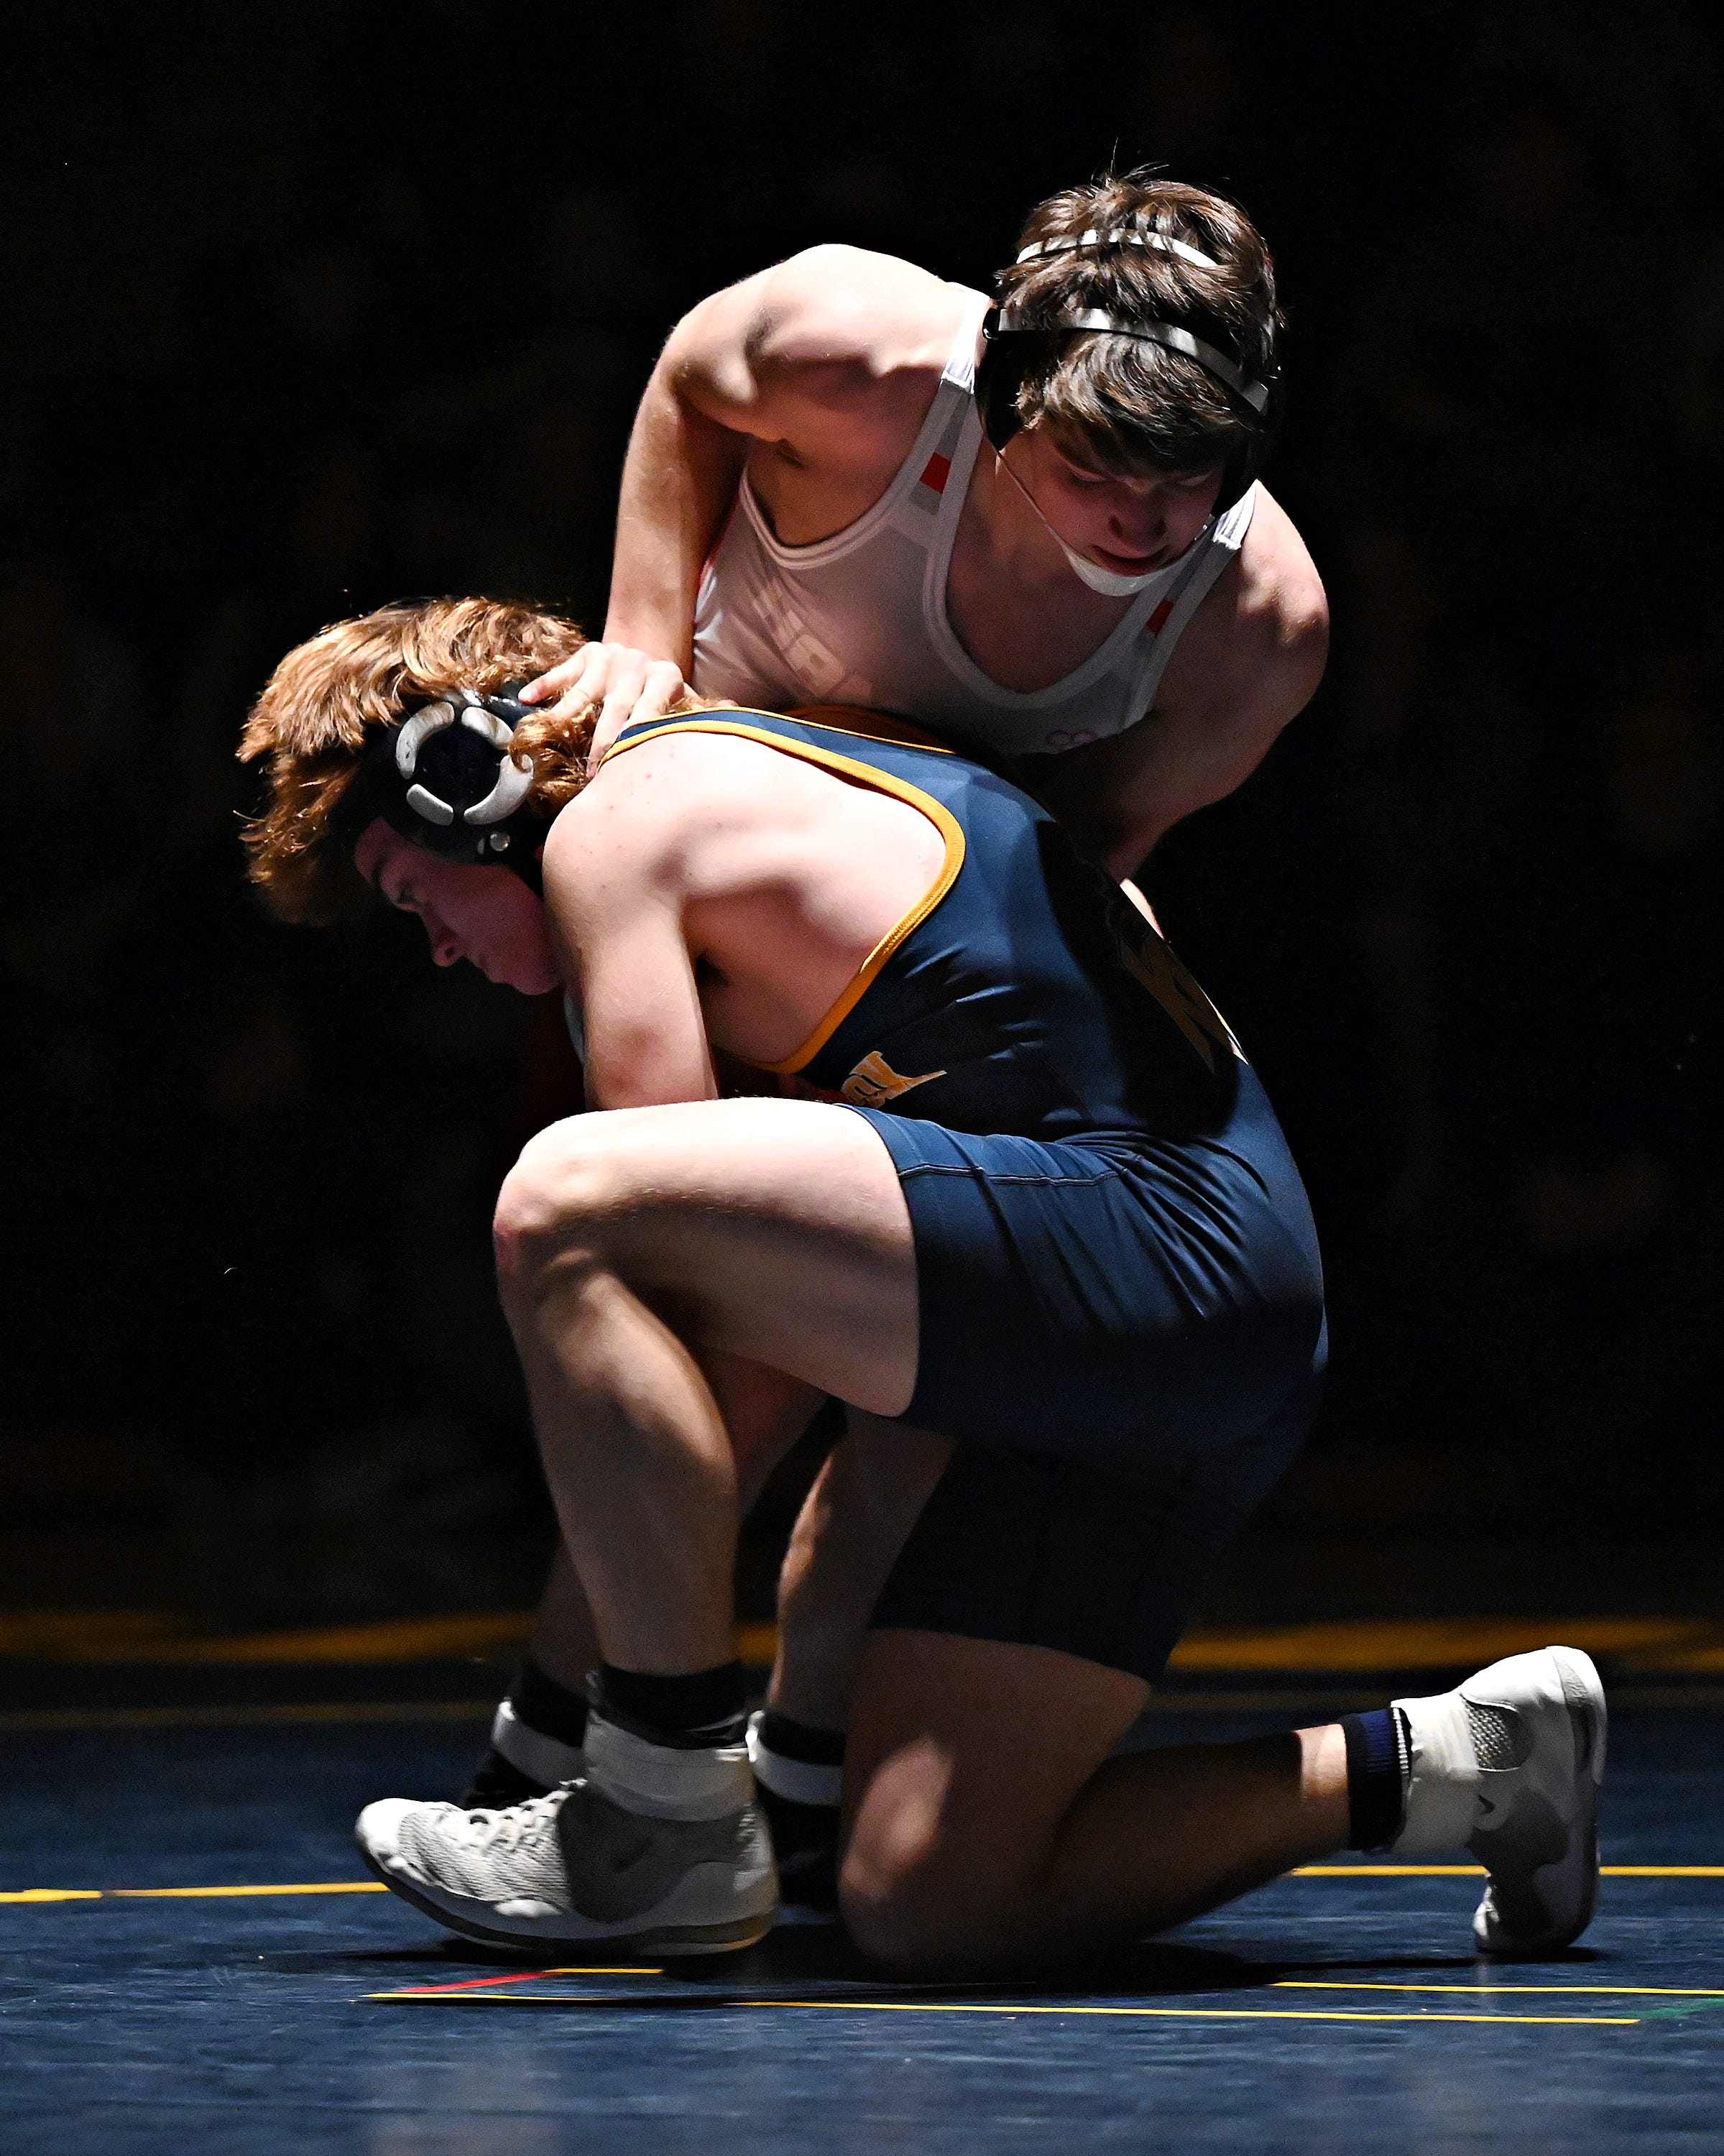 Eastern York’s Sam Myers, front, and Hamburg’s Holden Gesicki compete in the 160-pound weight class during PIAA District 3, Class 2-A first round wrestling action at Eastern York High School in Lower Windsor Township, Monday, Jan. 30, 2023. Myers would win the match and Eastern York would win the meet 50-22. Dawn J. Sagert photo